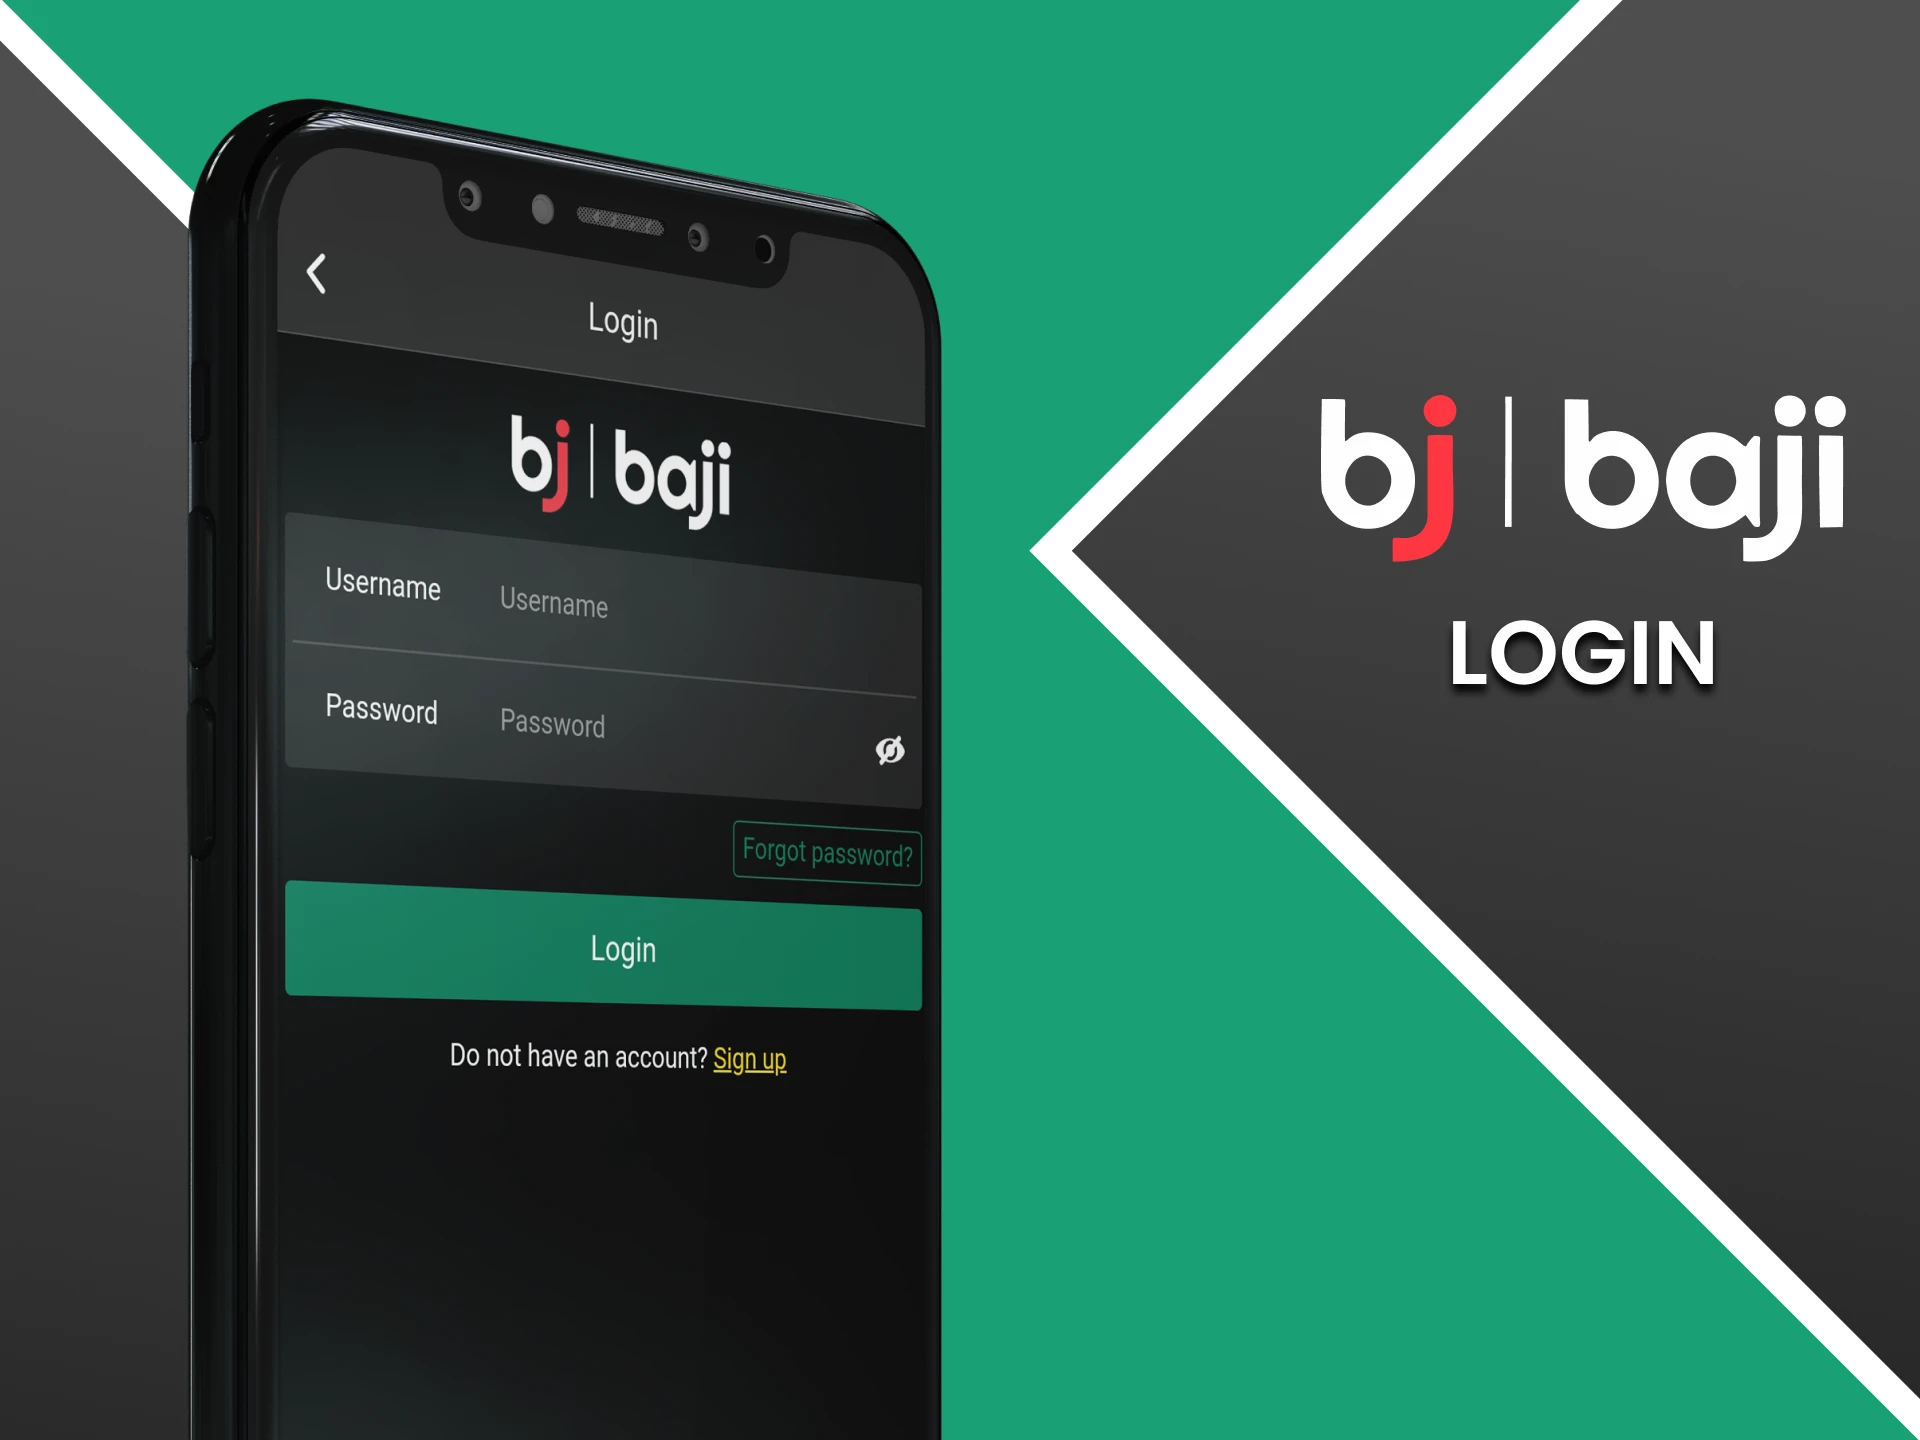 Instructions on how to Baji app login. Follow the instructions below to access the gaming platform.